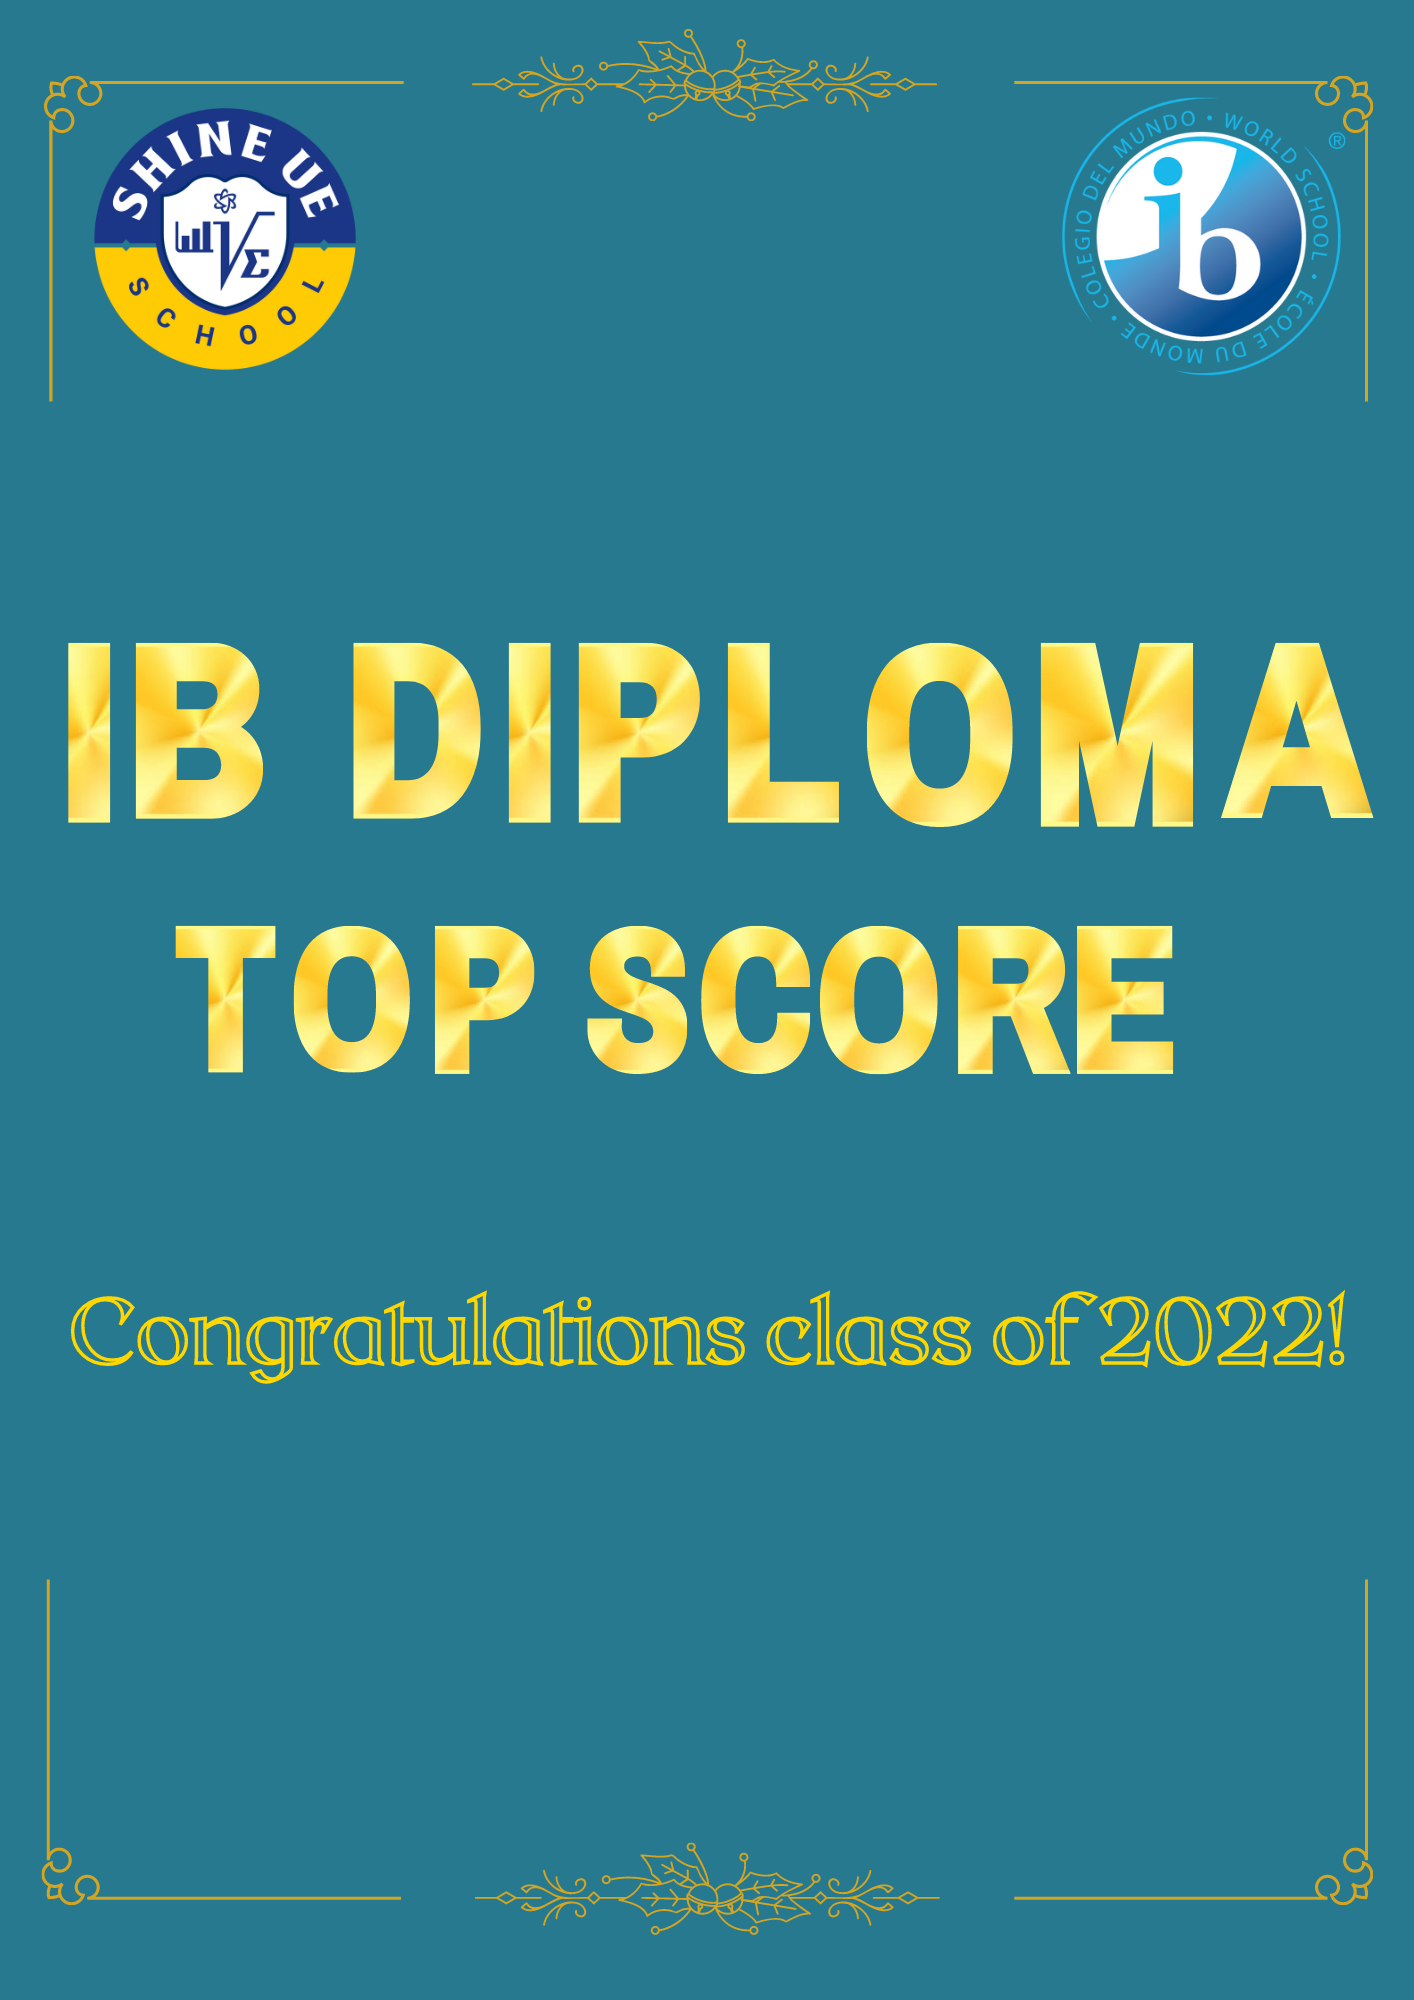 THE THIRD SUCCESSFUL GRADUATION OF THE INTERNATIONAL BACCALAUREATE DIPLOMA PROGRAMME